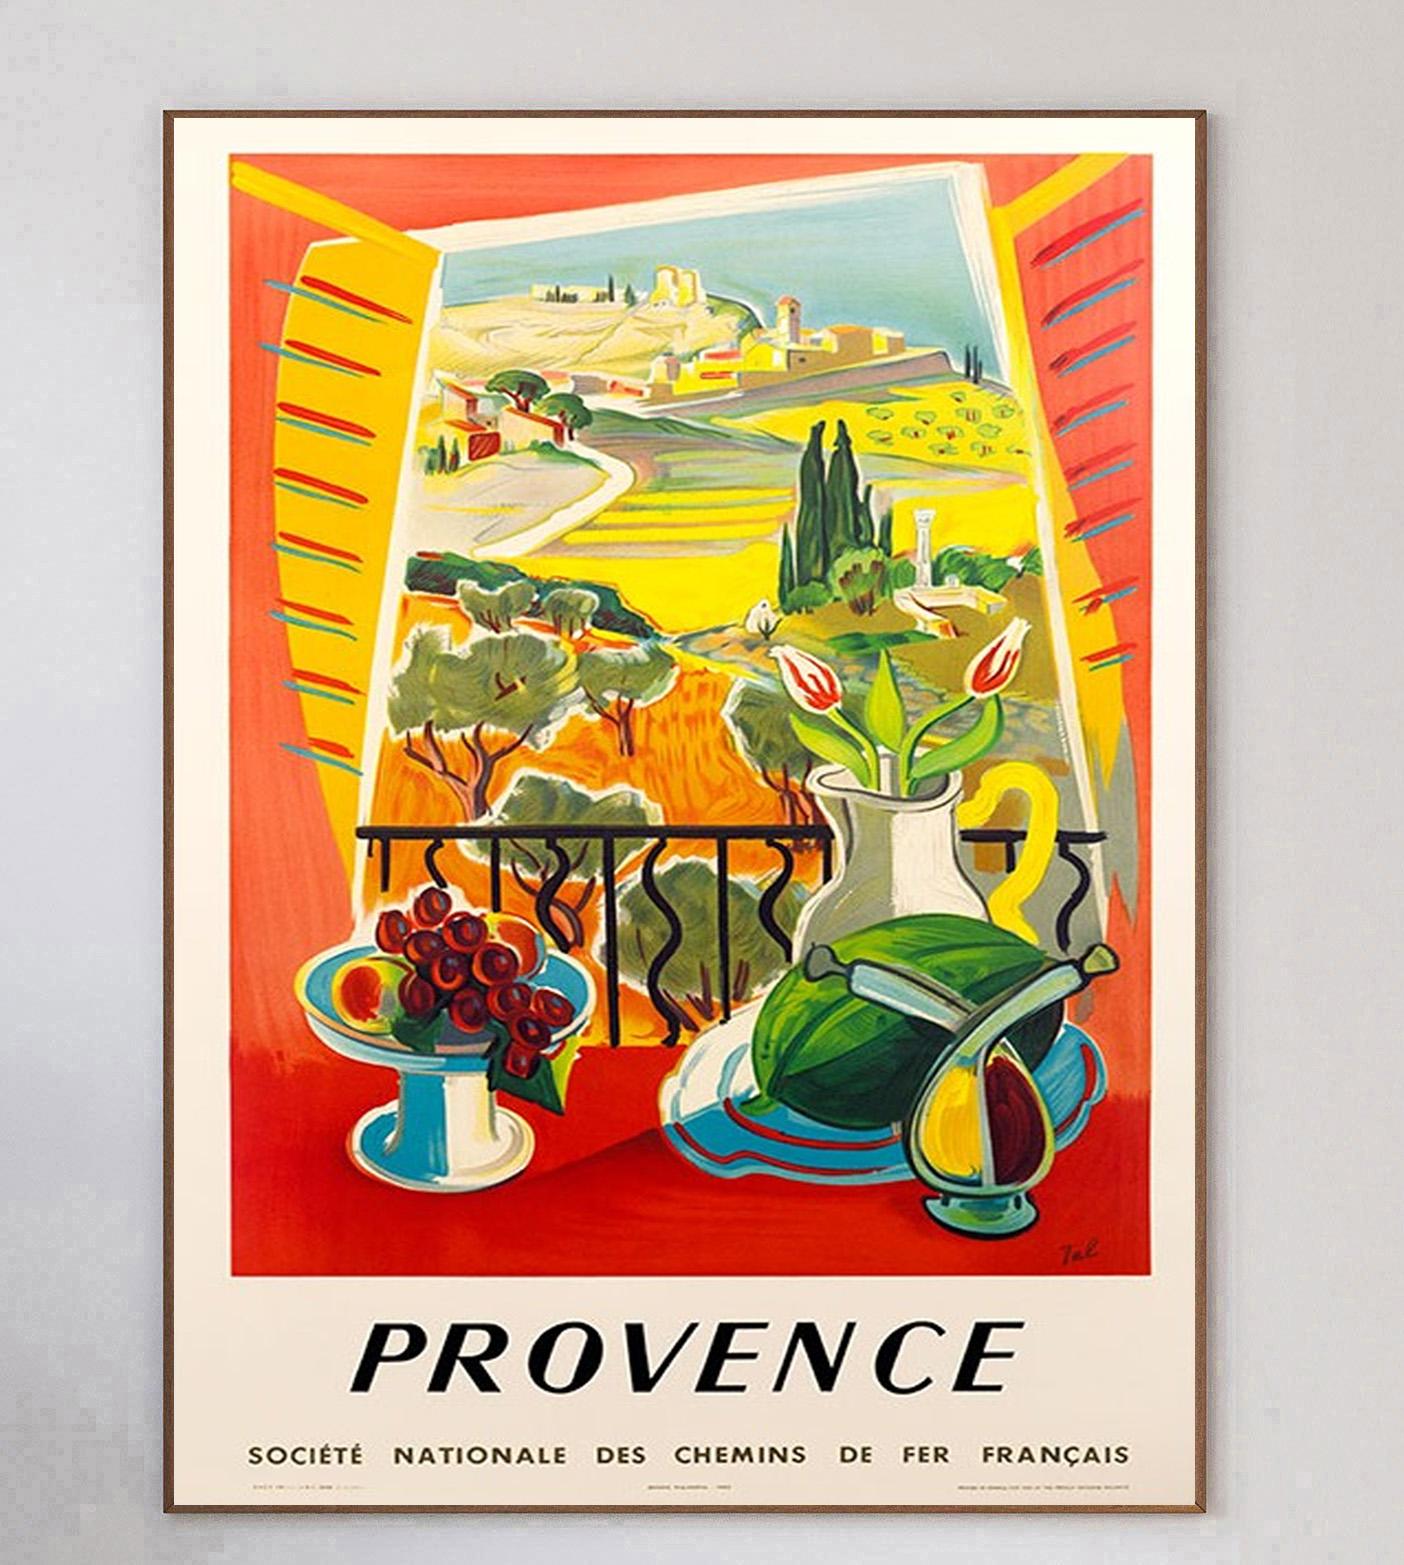 Charming poster from 1970 for the French railway SNCF promoting their routes to Provence in south eastern France. 

Featuring gorgeous artwork of a sunny scene out of an open window, the vibrant piece was designed by artist TAL, originally in 1947.